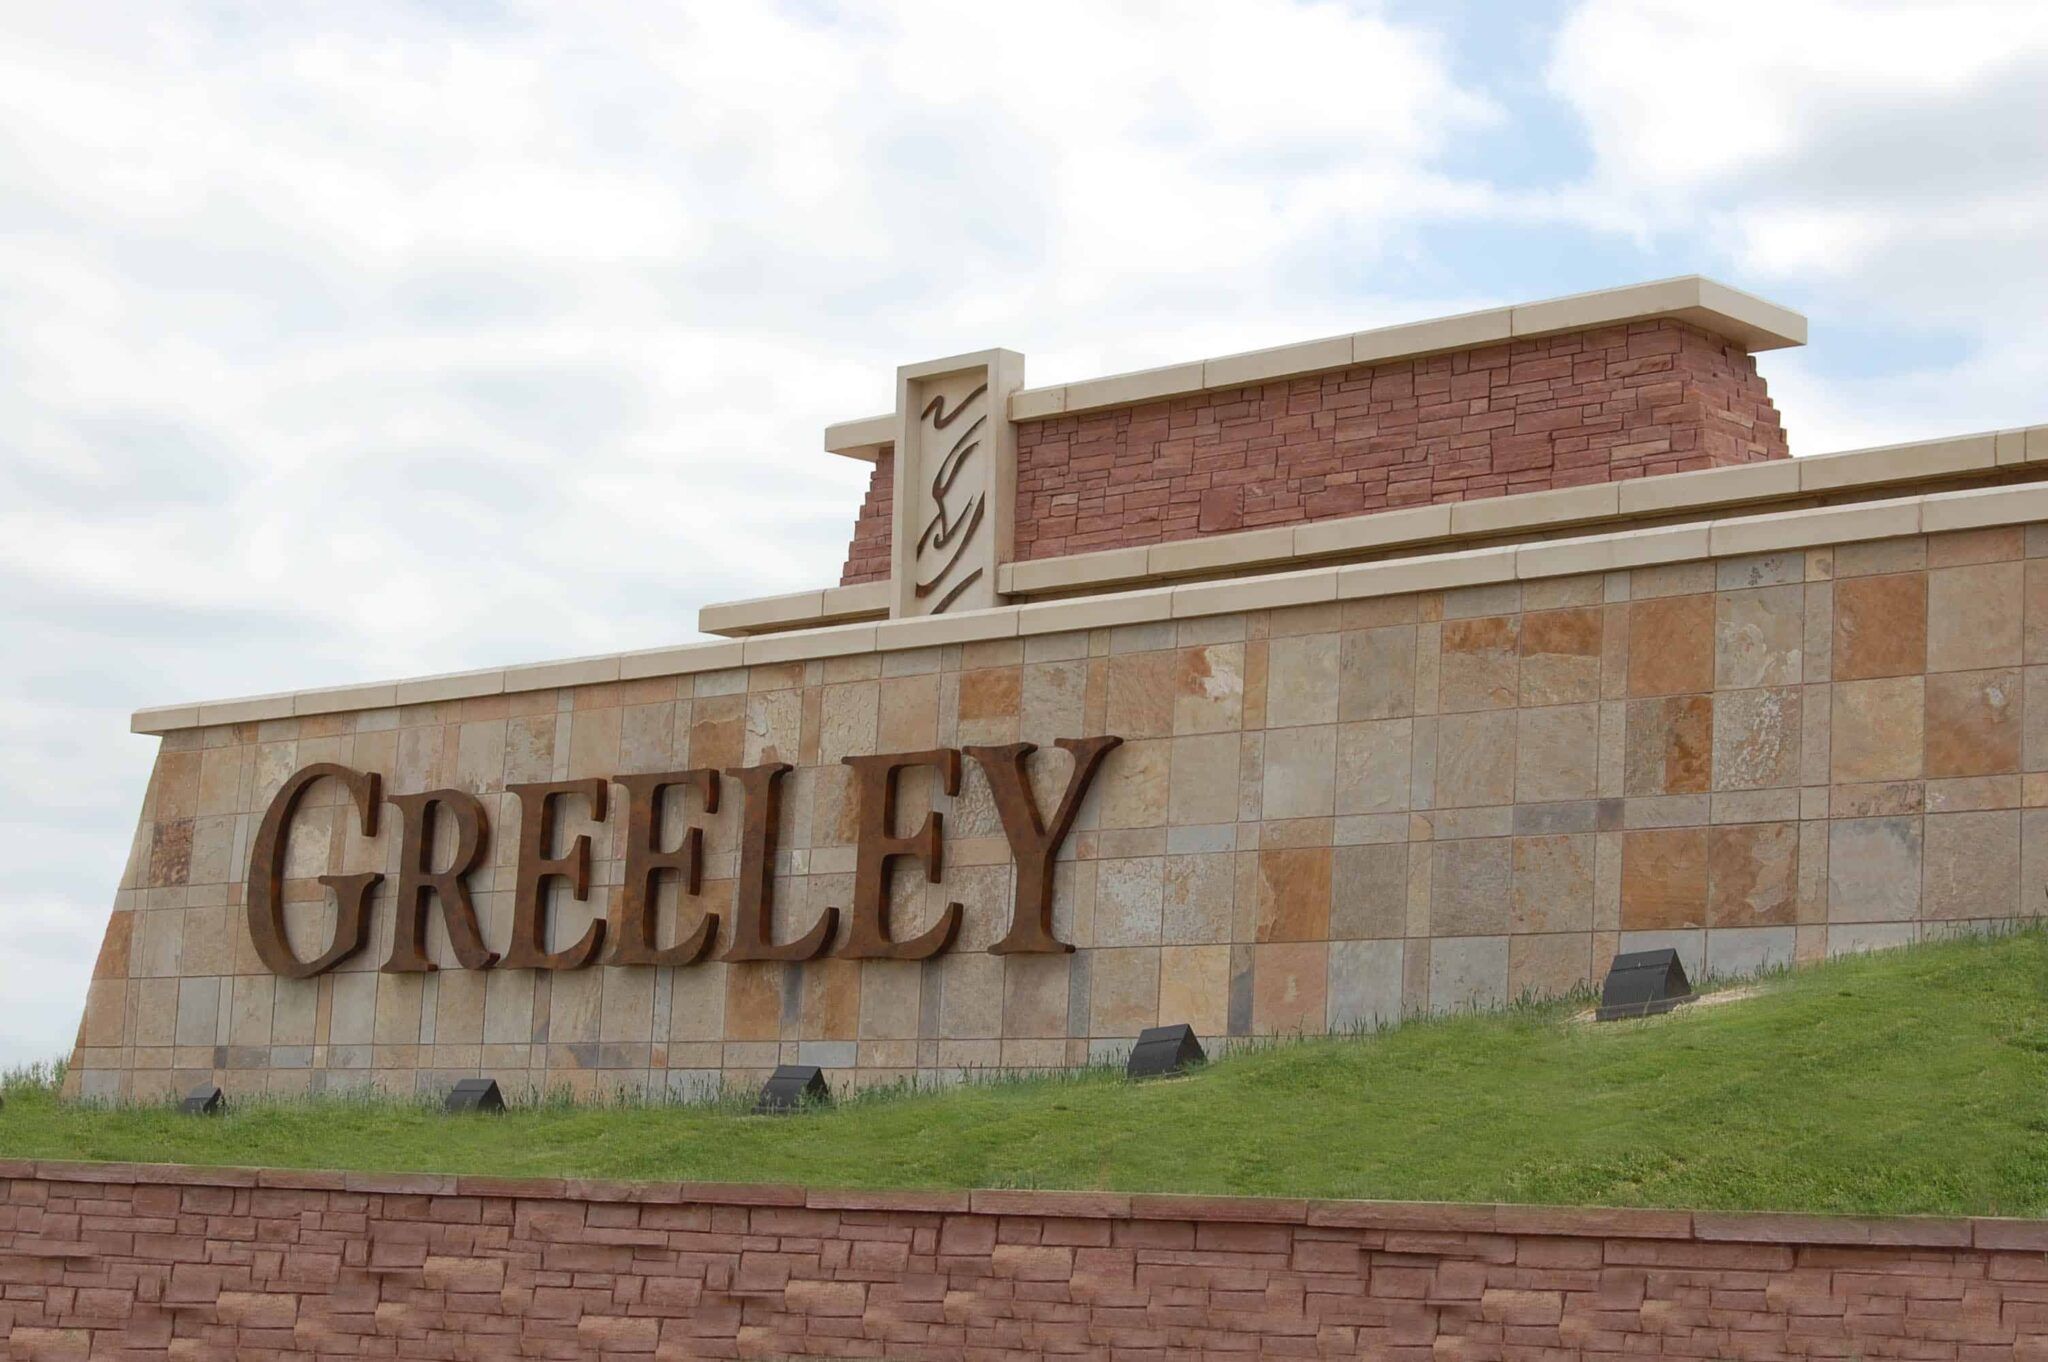 greeley entry sign